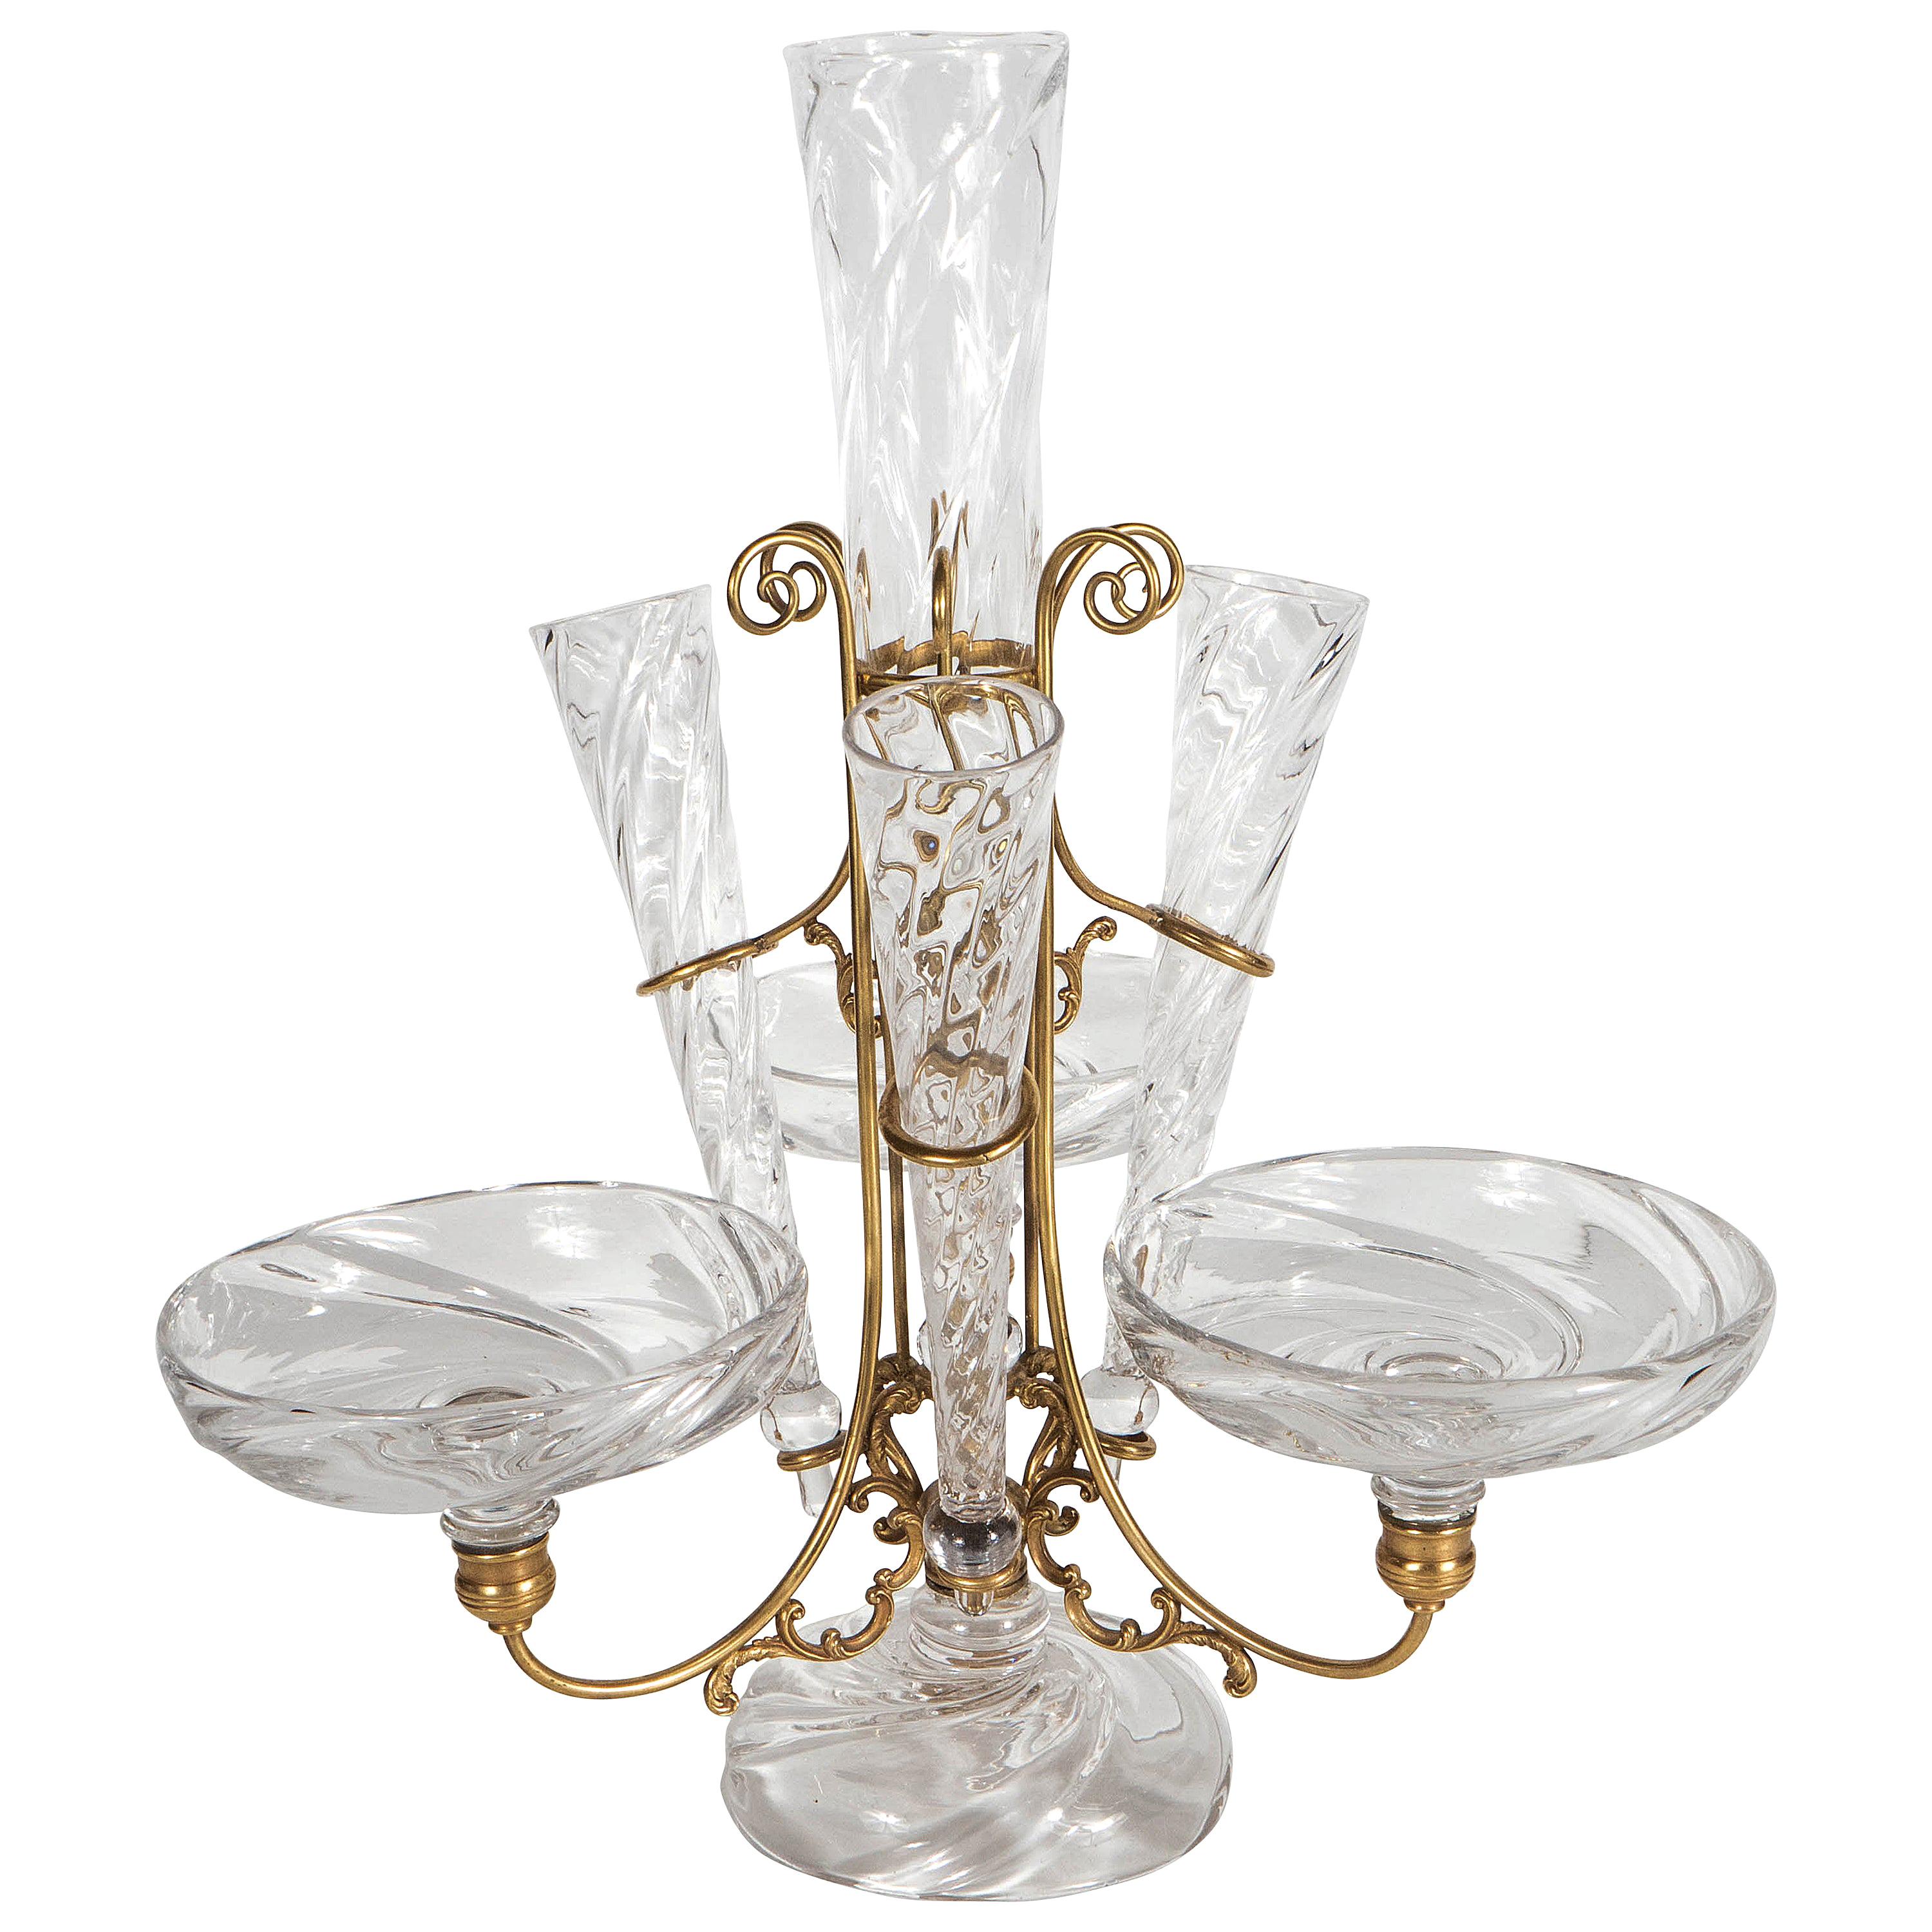 French Art Deco Hand Blown Crystal and Brass Scroll Form Design Epergne